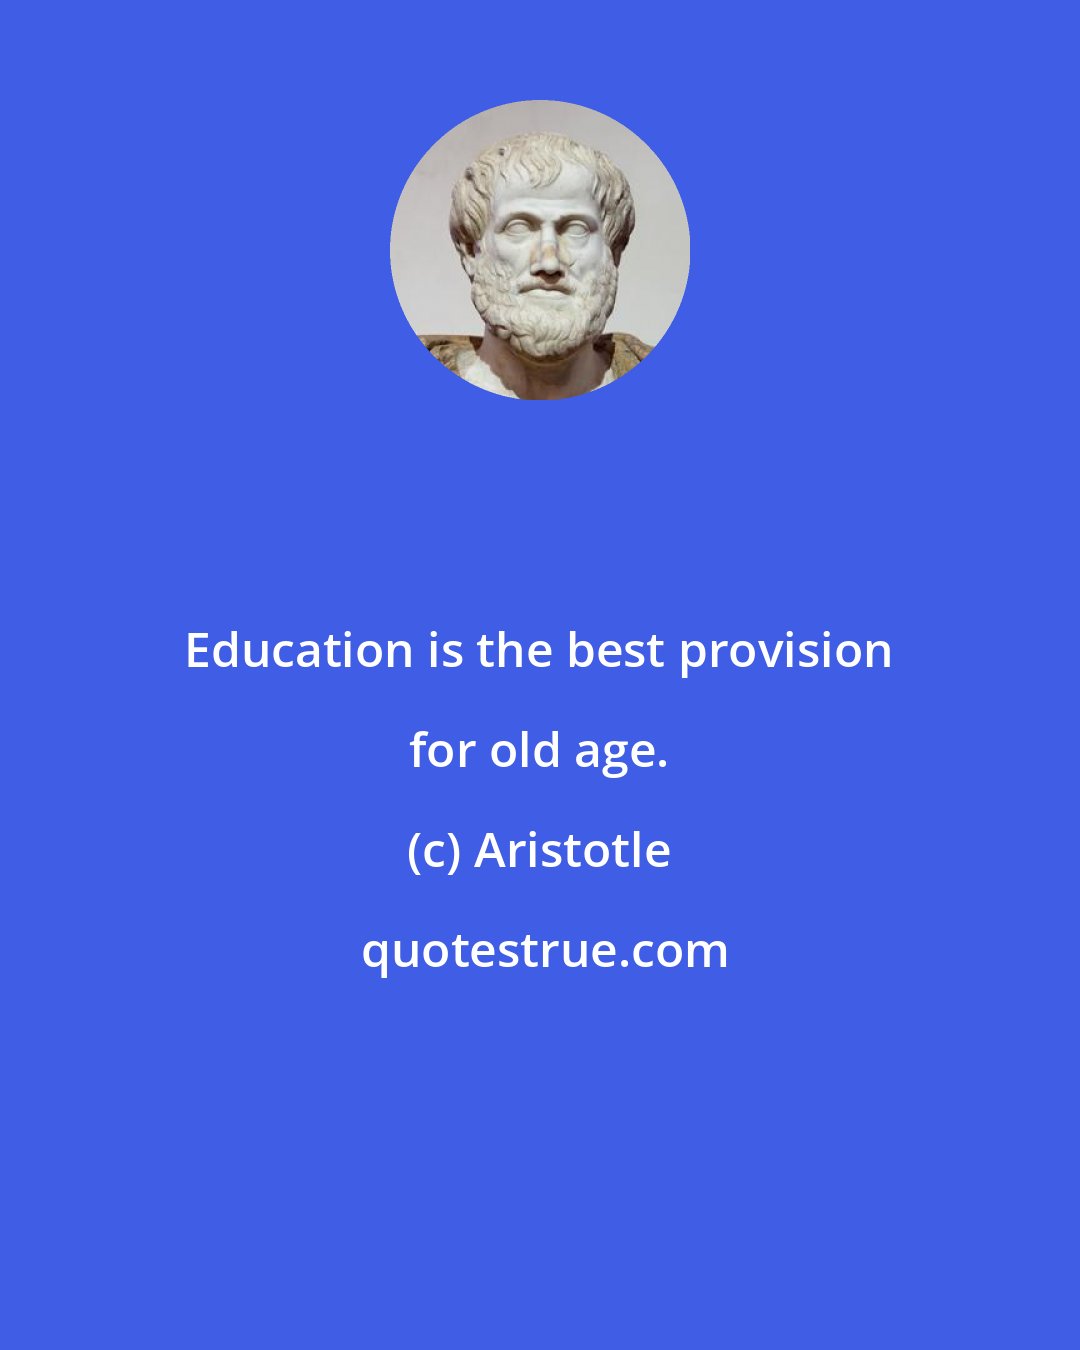 Aristotle: Education is the best provision for old age.